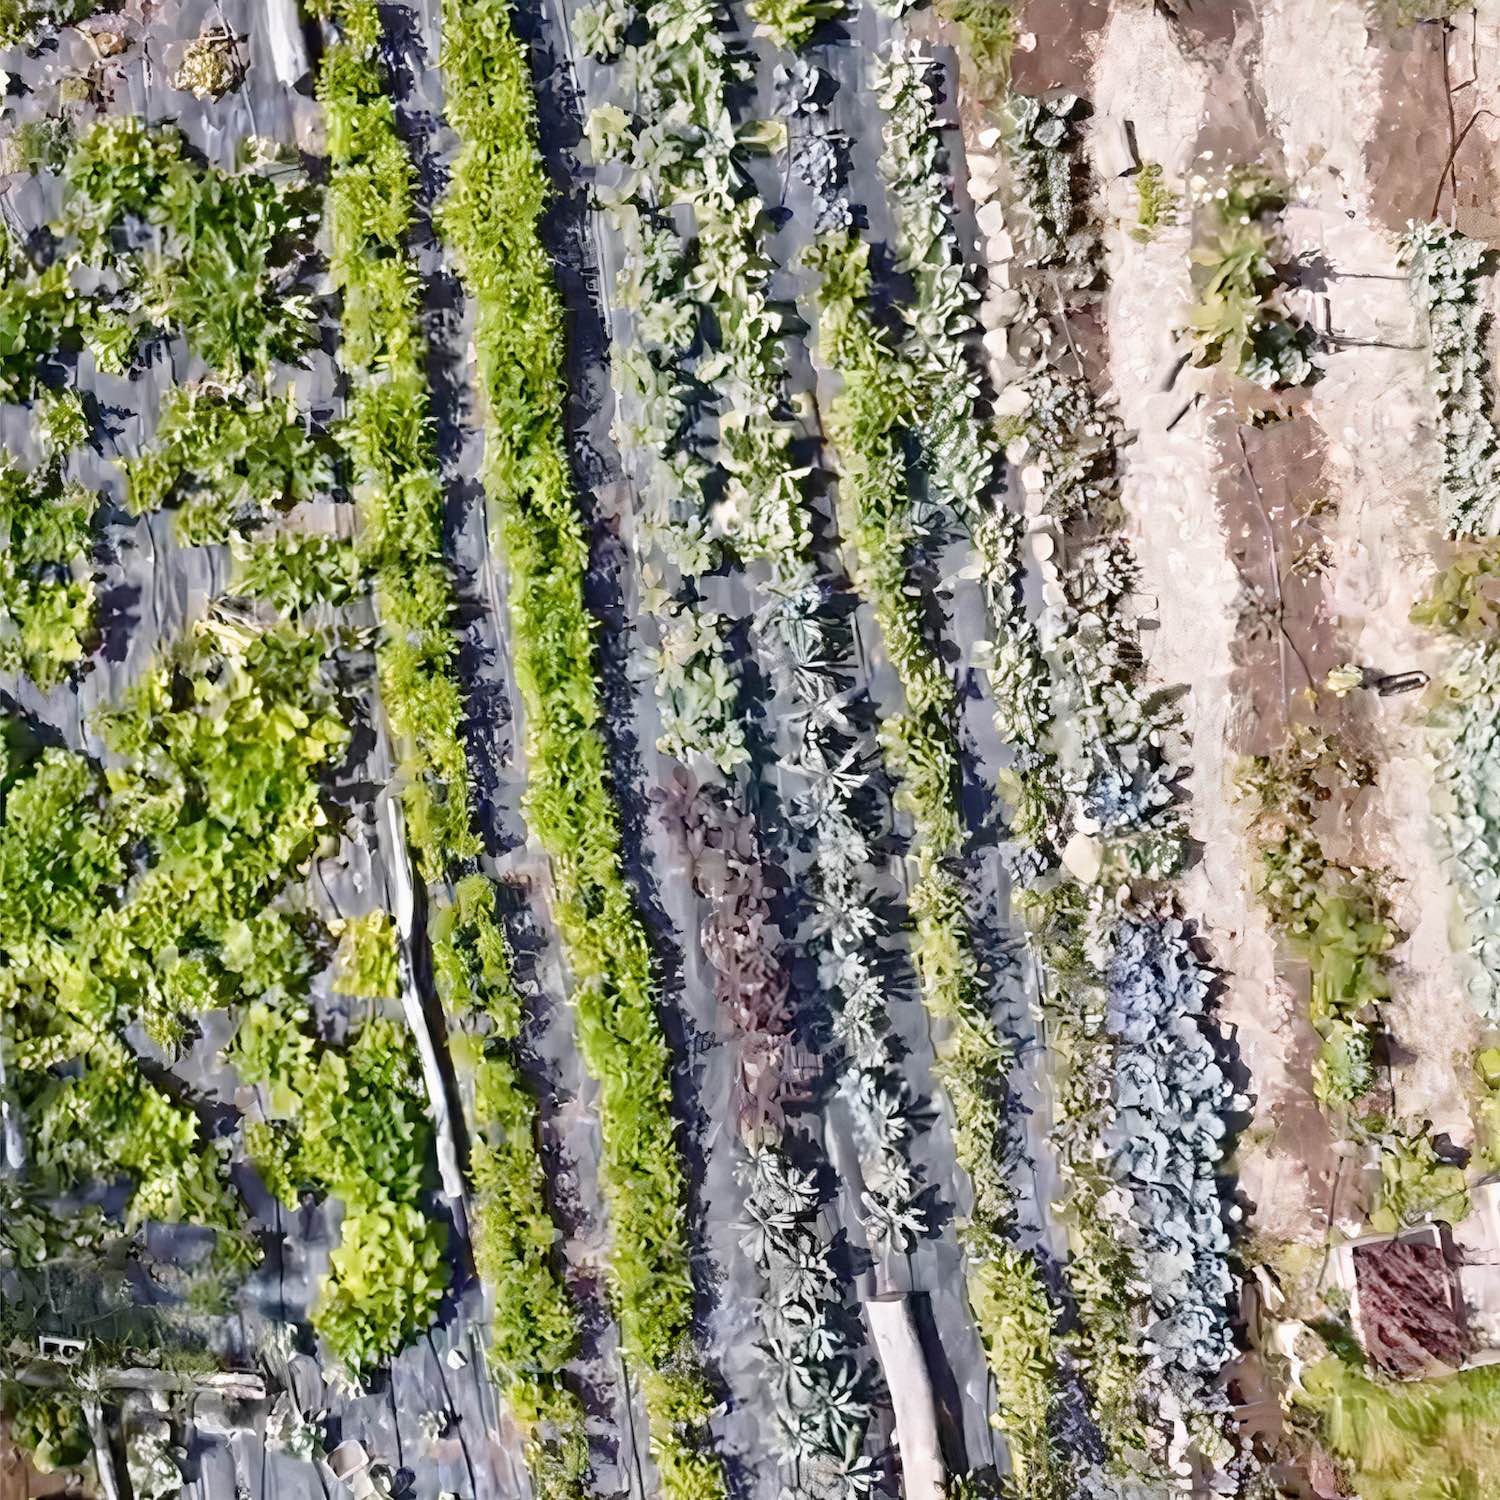 Aerial shot of produce growing on farm